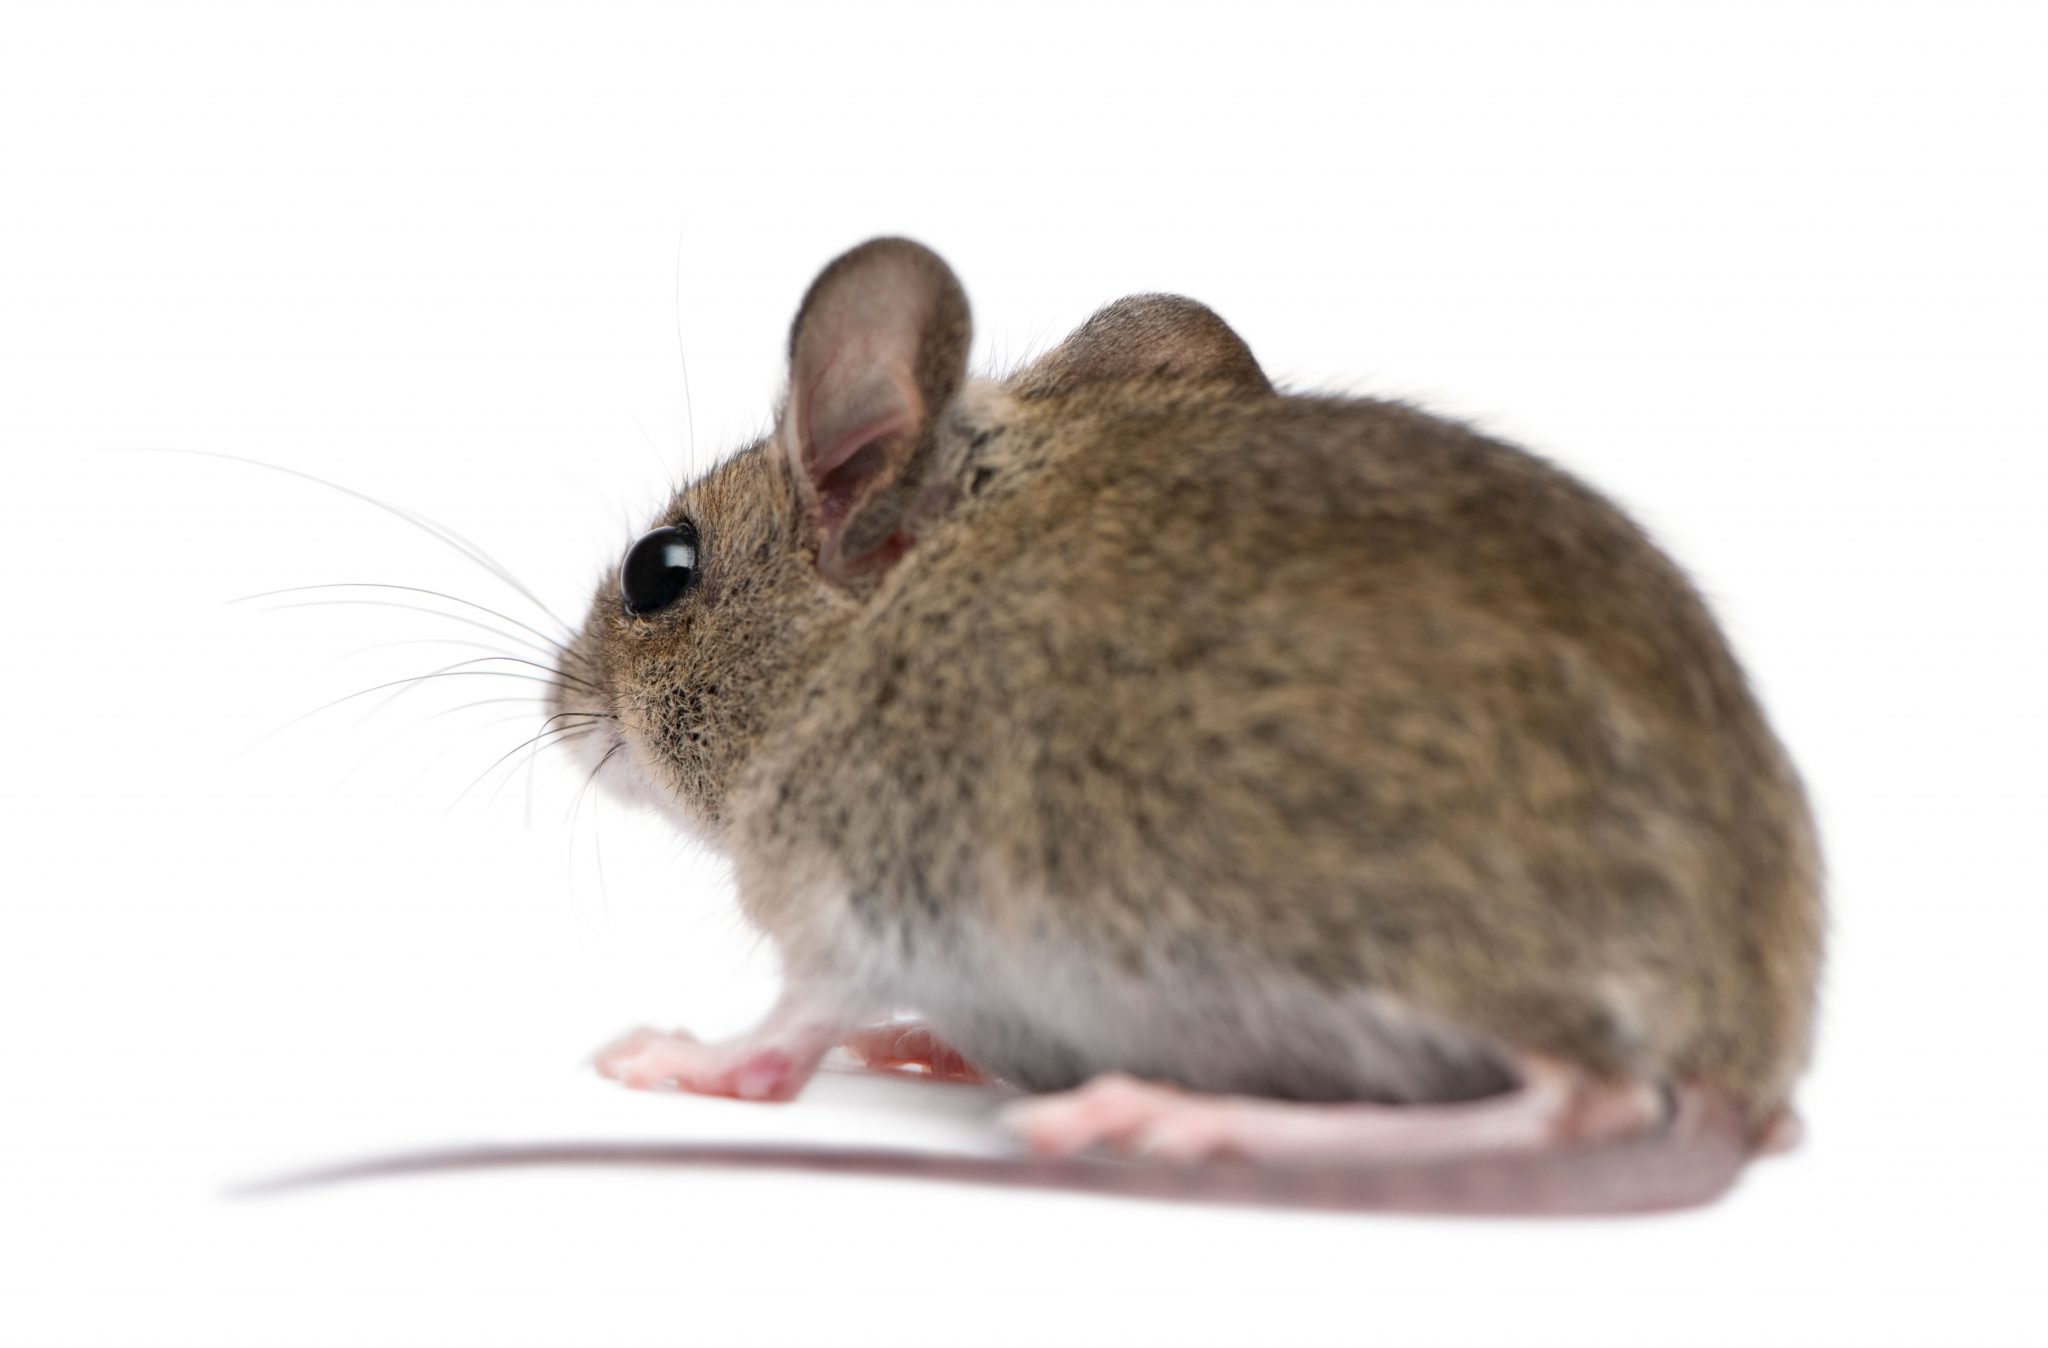 photograph of mouse showing the need for pest control